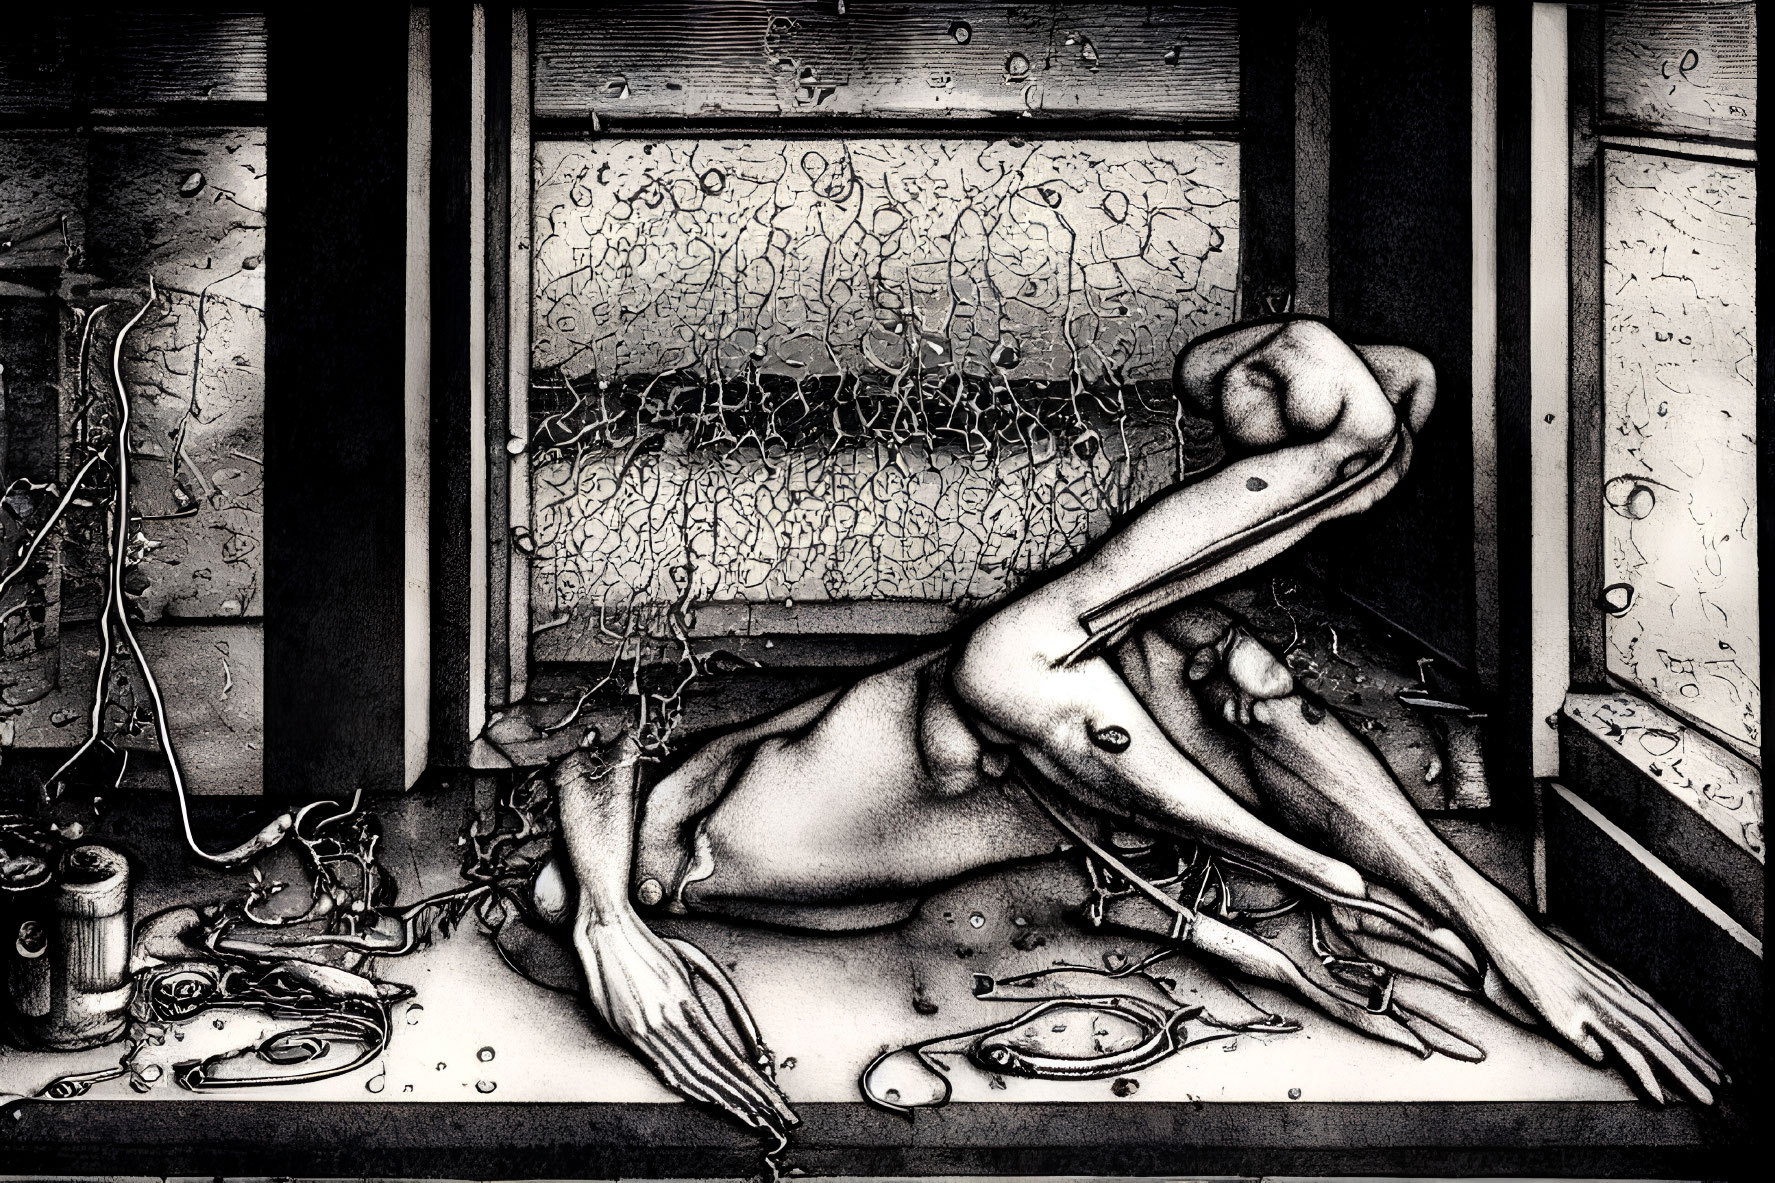 Detailed monochrome surreal figure in decrepit window frame with scattered objects